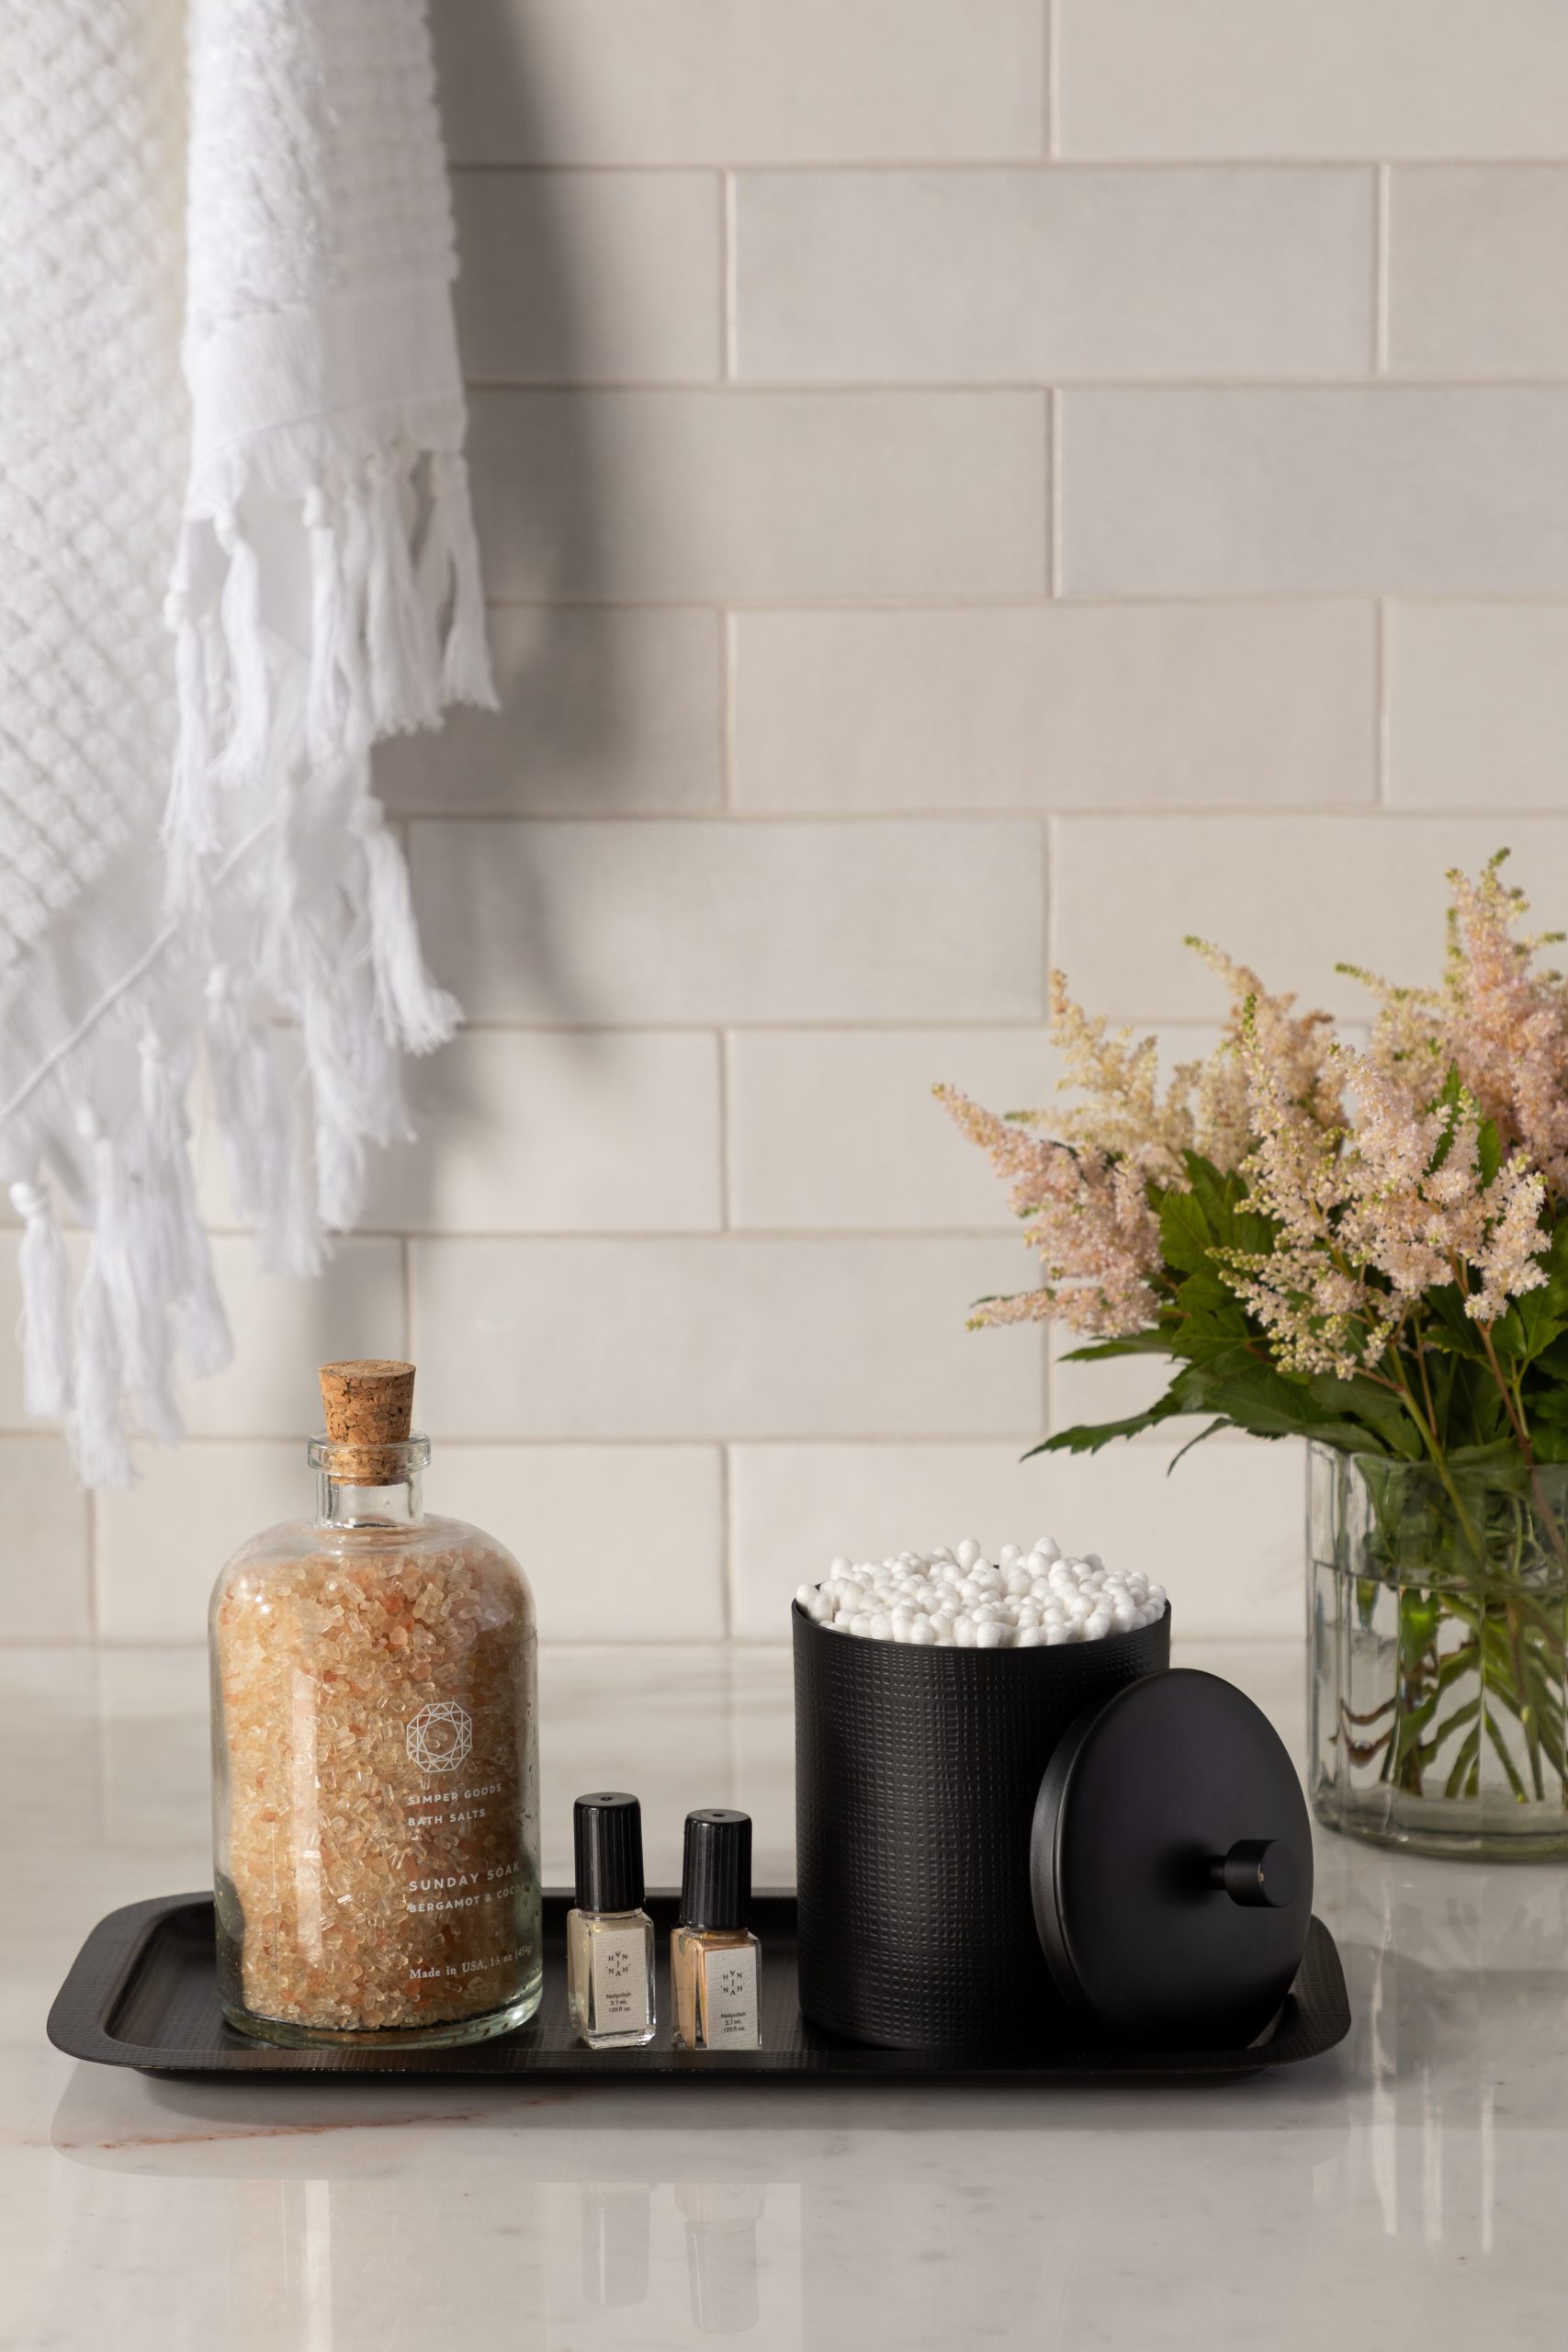 bathroom soaps and scents